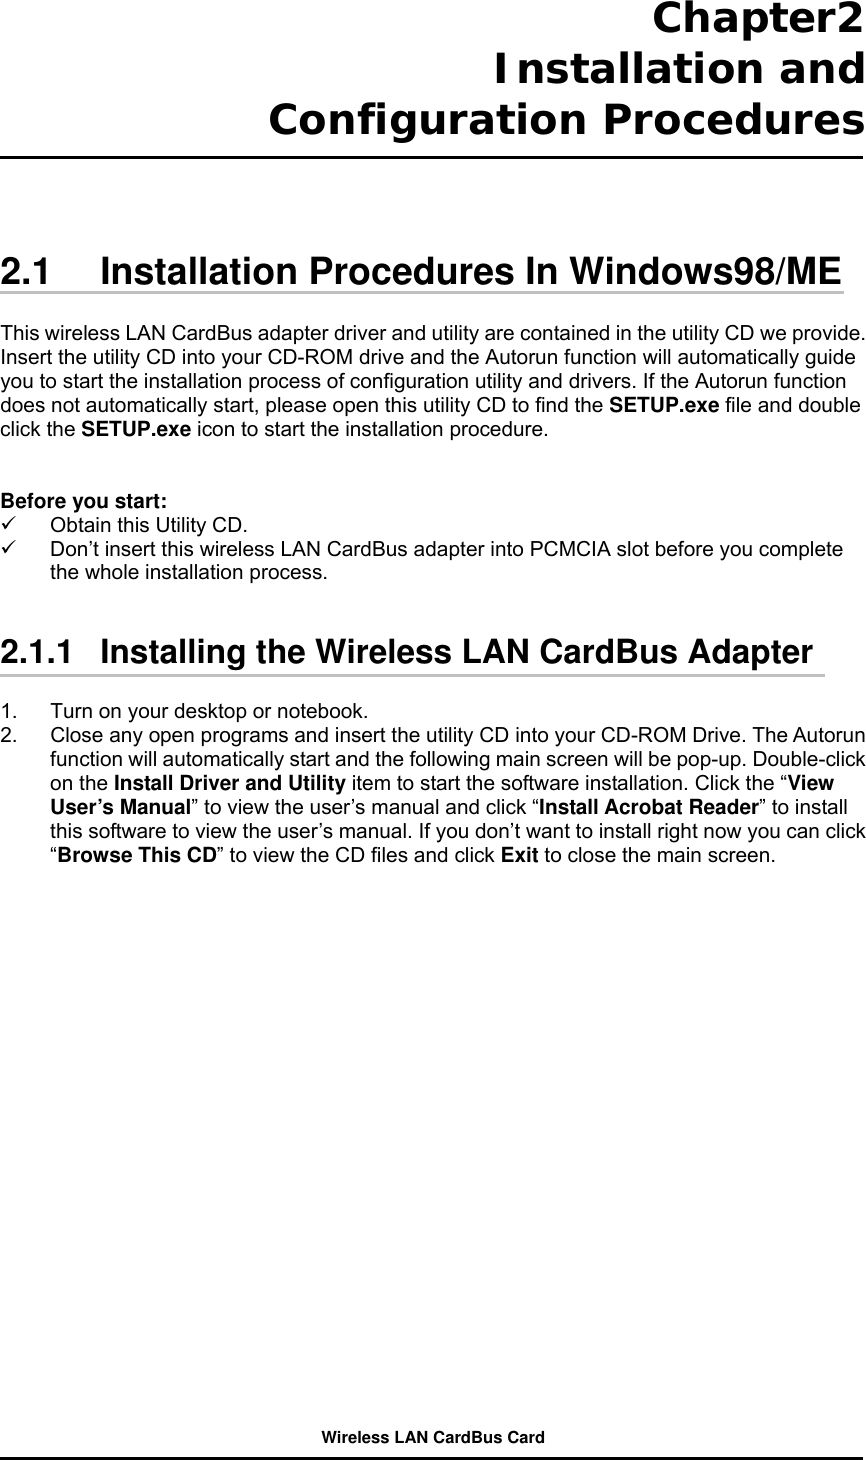 Chapter2  Installation and Configuration Procedures     2.1  Installation Procedures In Windows98/ME  This wireless LAN CardBus adapter driver and utility are contained in the utility CD we provide. Insert the utility CD into your CD-ROM drive and the Autorun function will automatically guide you to start the installation process of configuration utility and drivers. If the Autorun function does not automatically start, please open this utility CD to find the SETUP.exe file and double click the SETUP.exe icon to start the installation procedure.     Before you start:   Obtain this Utility CD.   Don’t insert this wireless LAN CardBus adapter into PCMCIA slot before you complete the whole installation process.     2.1.1   Installing the Wireless LAN CardBus Adapter  1.  Turn on your desktop or notebook.   2.  Close any open programs and insert the utility CD into your CD-ROM Drive. The Autorun function will automatically start and the following main screen will be pop-up. Double-click on the Install Driver and Utility item to start the software installation. Click the “View User’s Manual” to view the user’s manual and click “Install Acrobat Reader” to install this software to view the user’s manual. If you don’t want to install right now you can click “Browse This CD” to view the CD files and click Exit to close the main screen.  Wireless LAN CardBus Card 